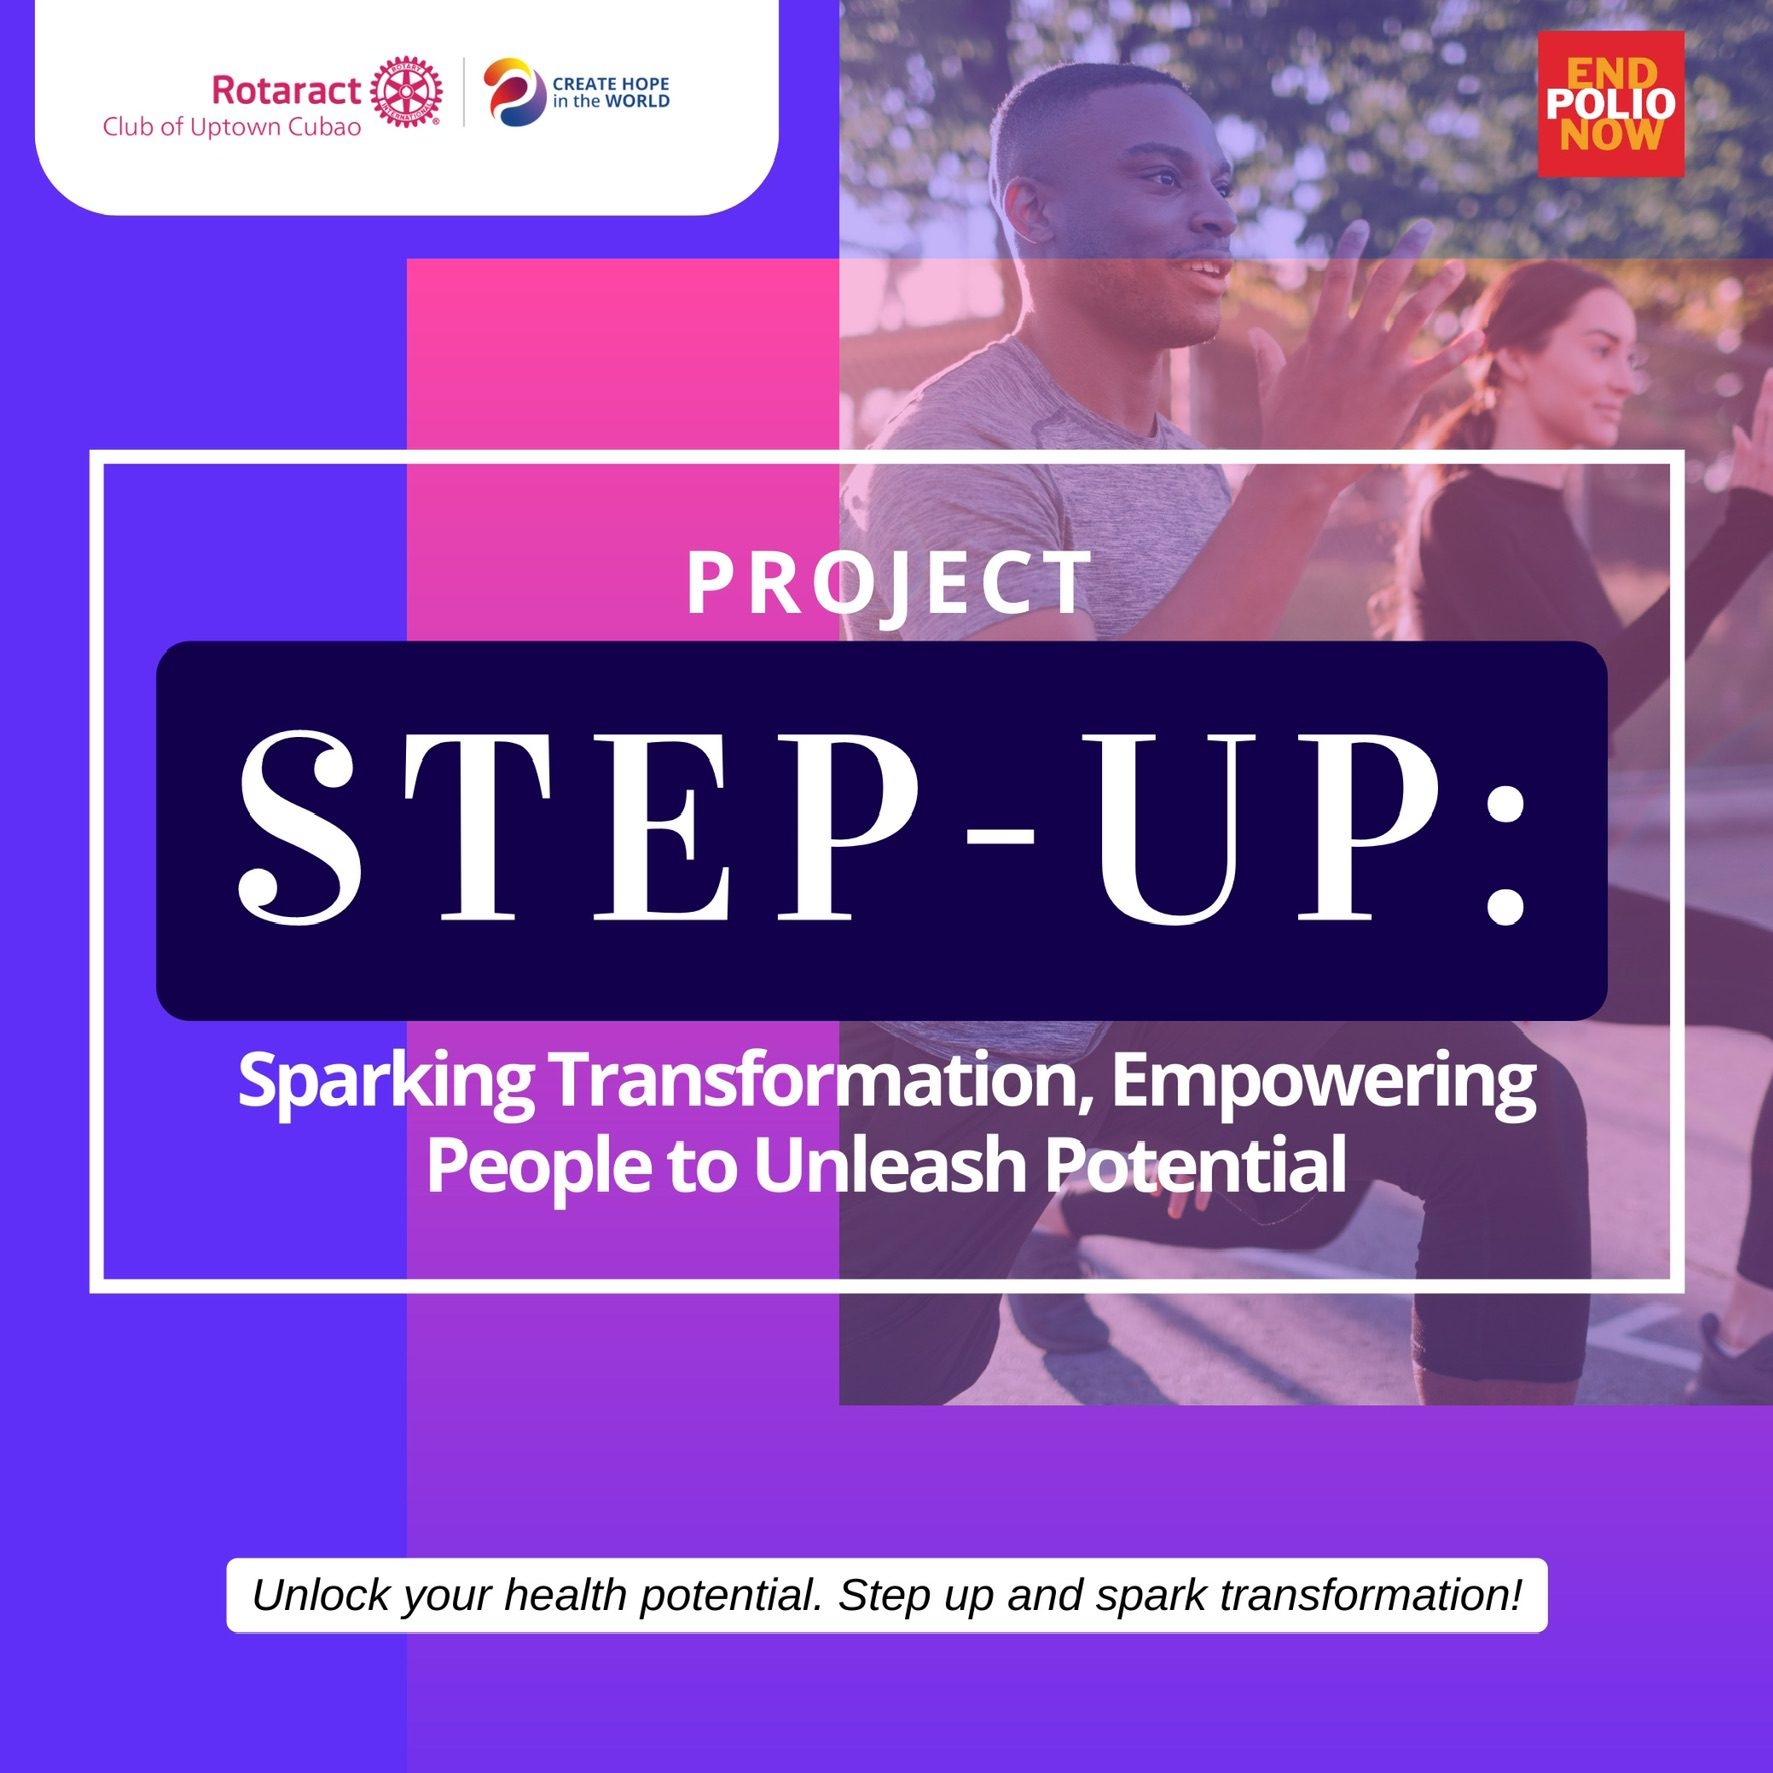 PROJECT STEP-UP: Sparking Transformation, Empowering People to Unleash Potential